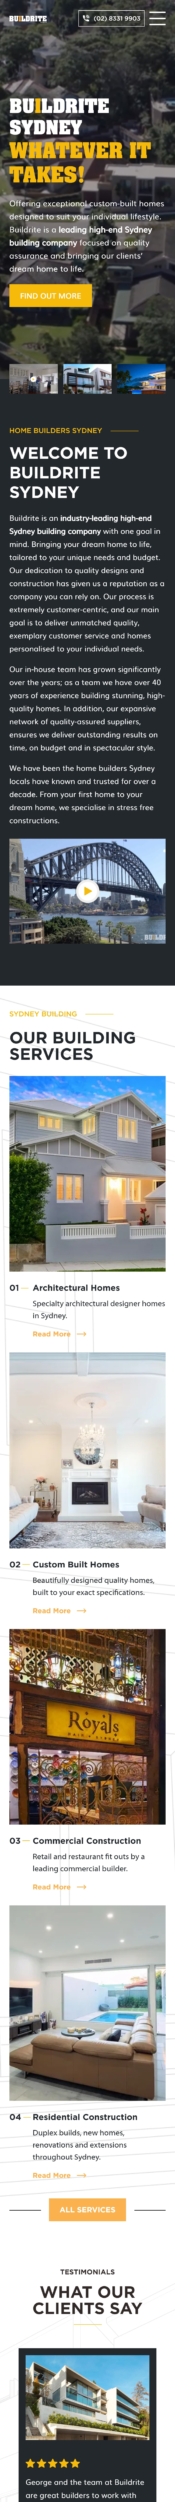 Buildrite sydney architecture about page